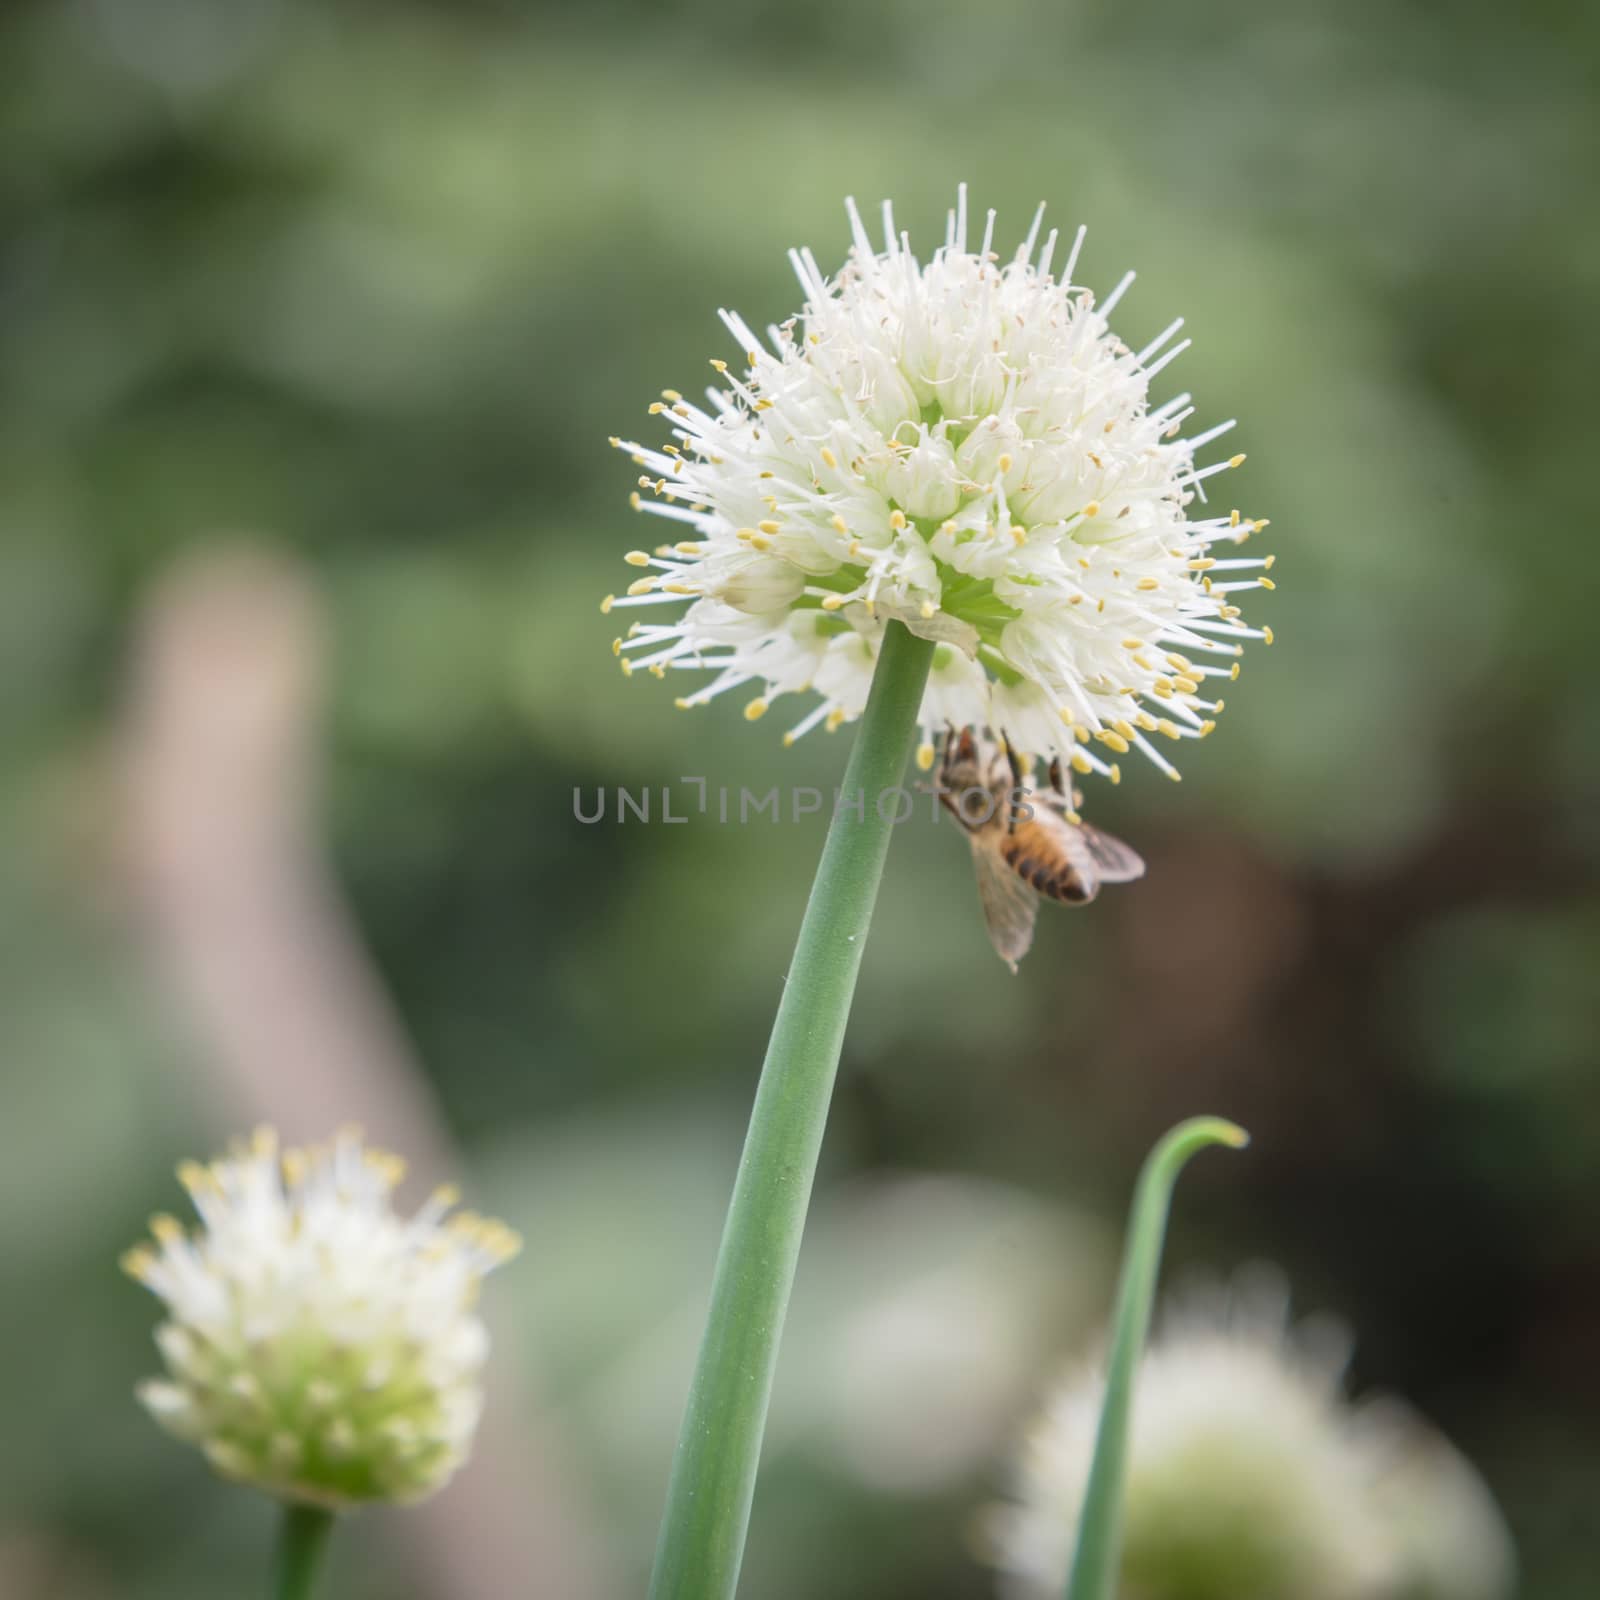 Busy bee on organic scallions flowering at rural garden in the North Vietnam by trongnguyen